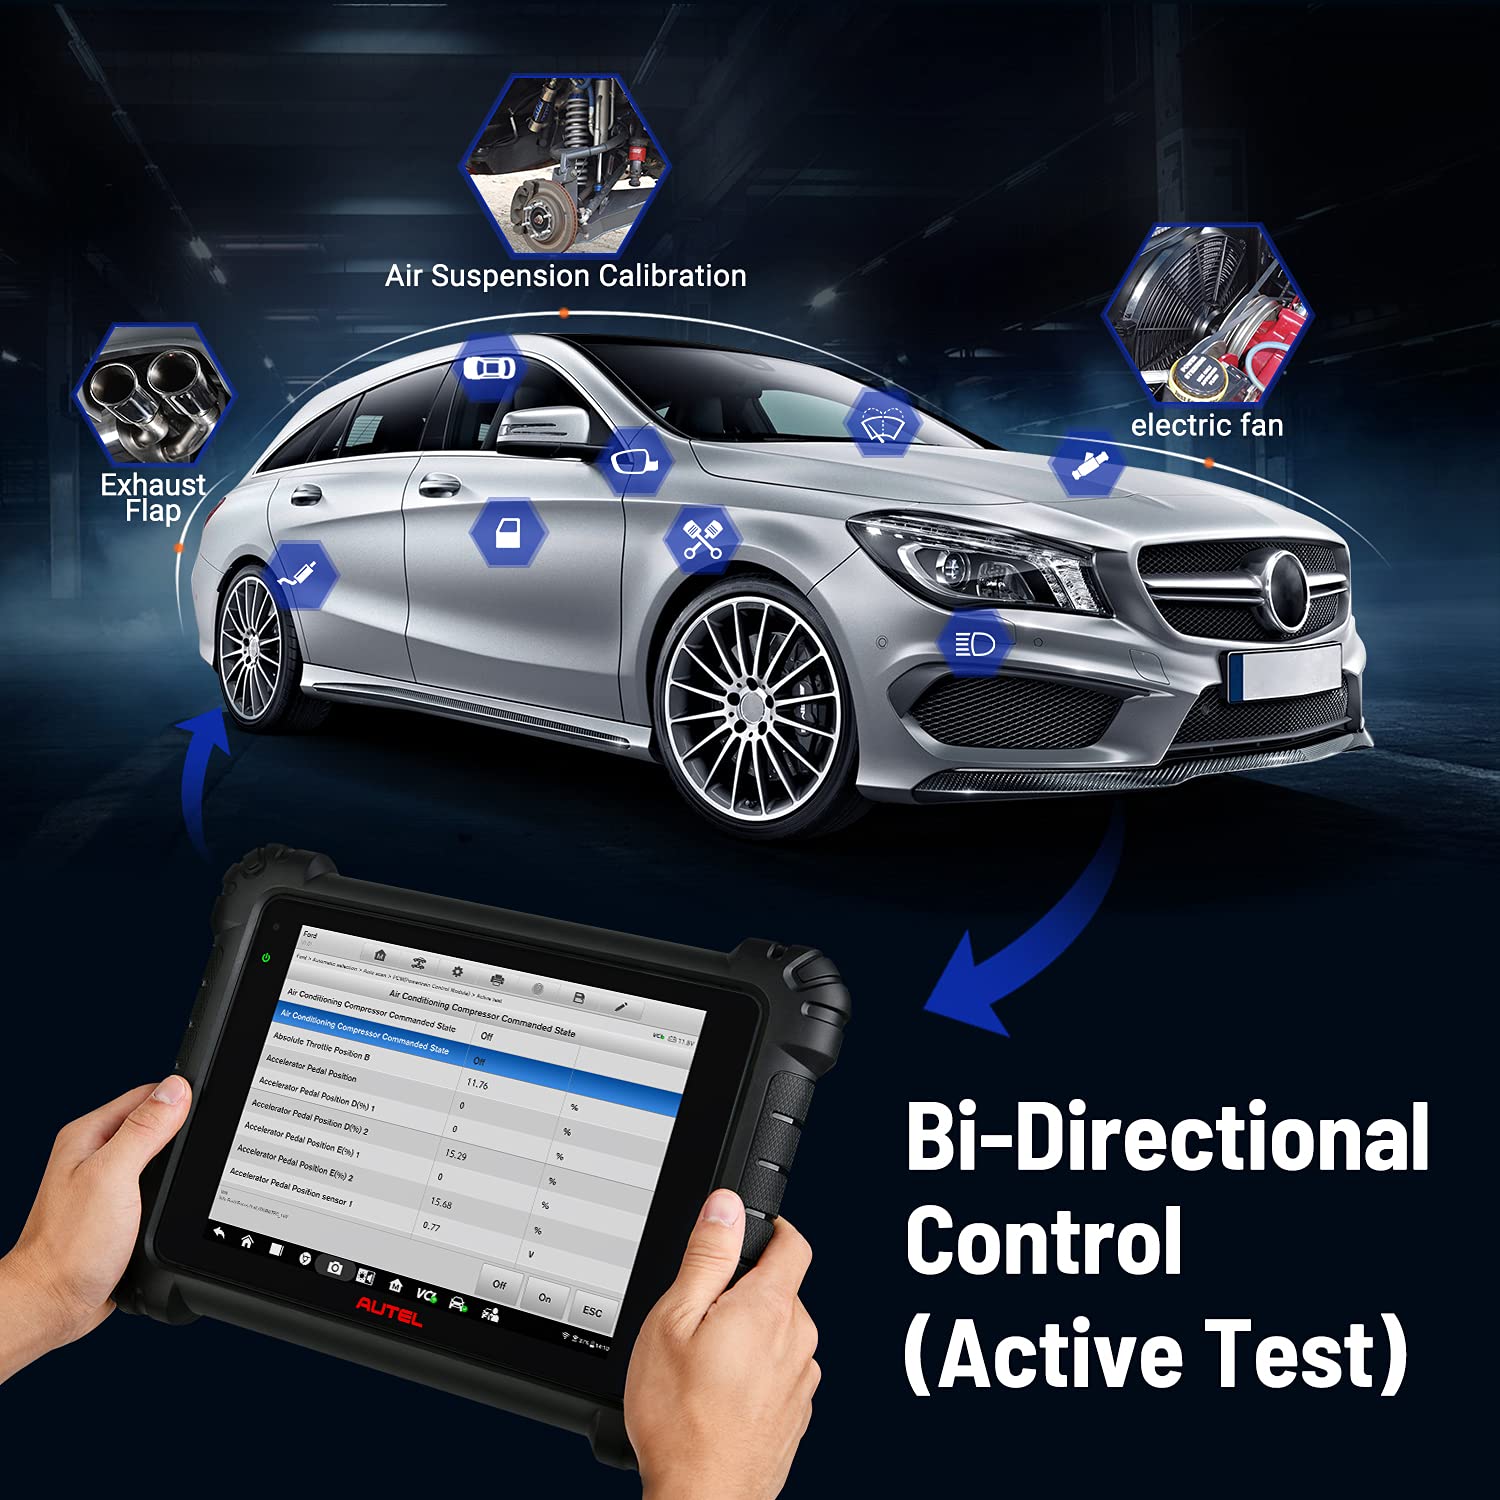 Autel Maxisys Ultra Lite Automotive Full System Diagnostic Tool Car Scanner supports bi-directional control.